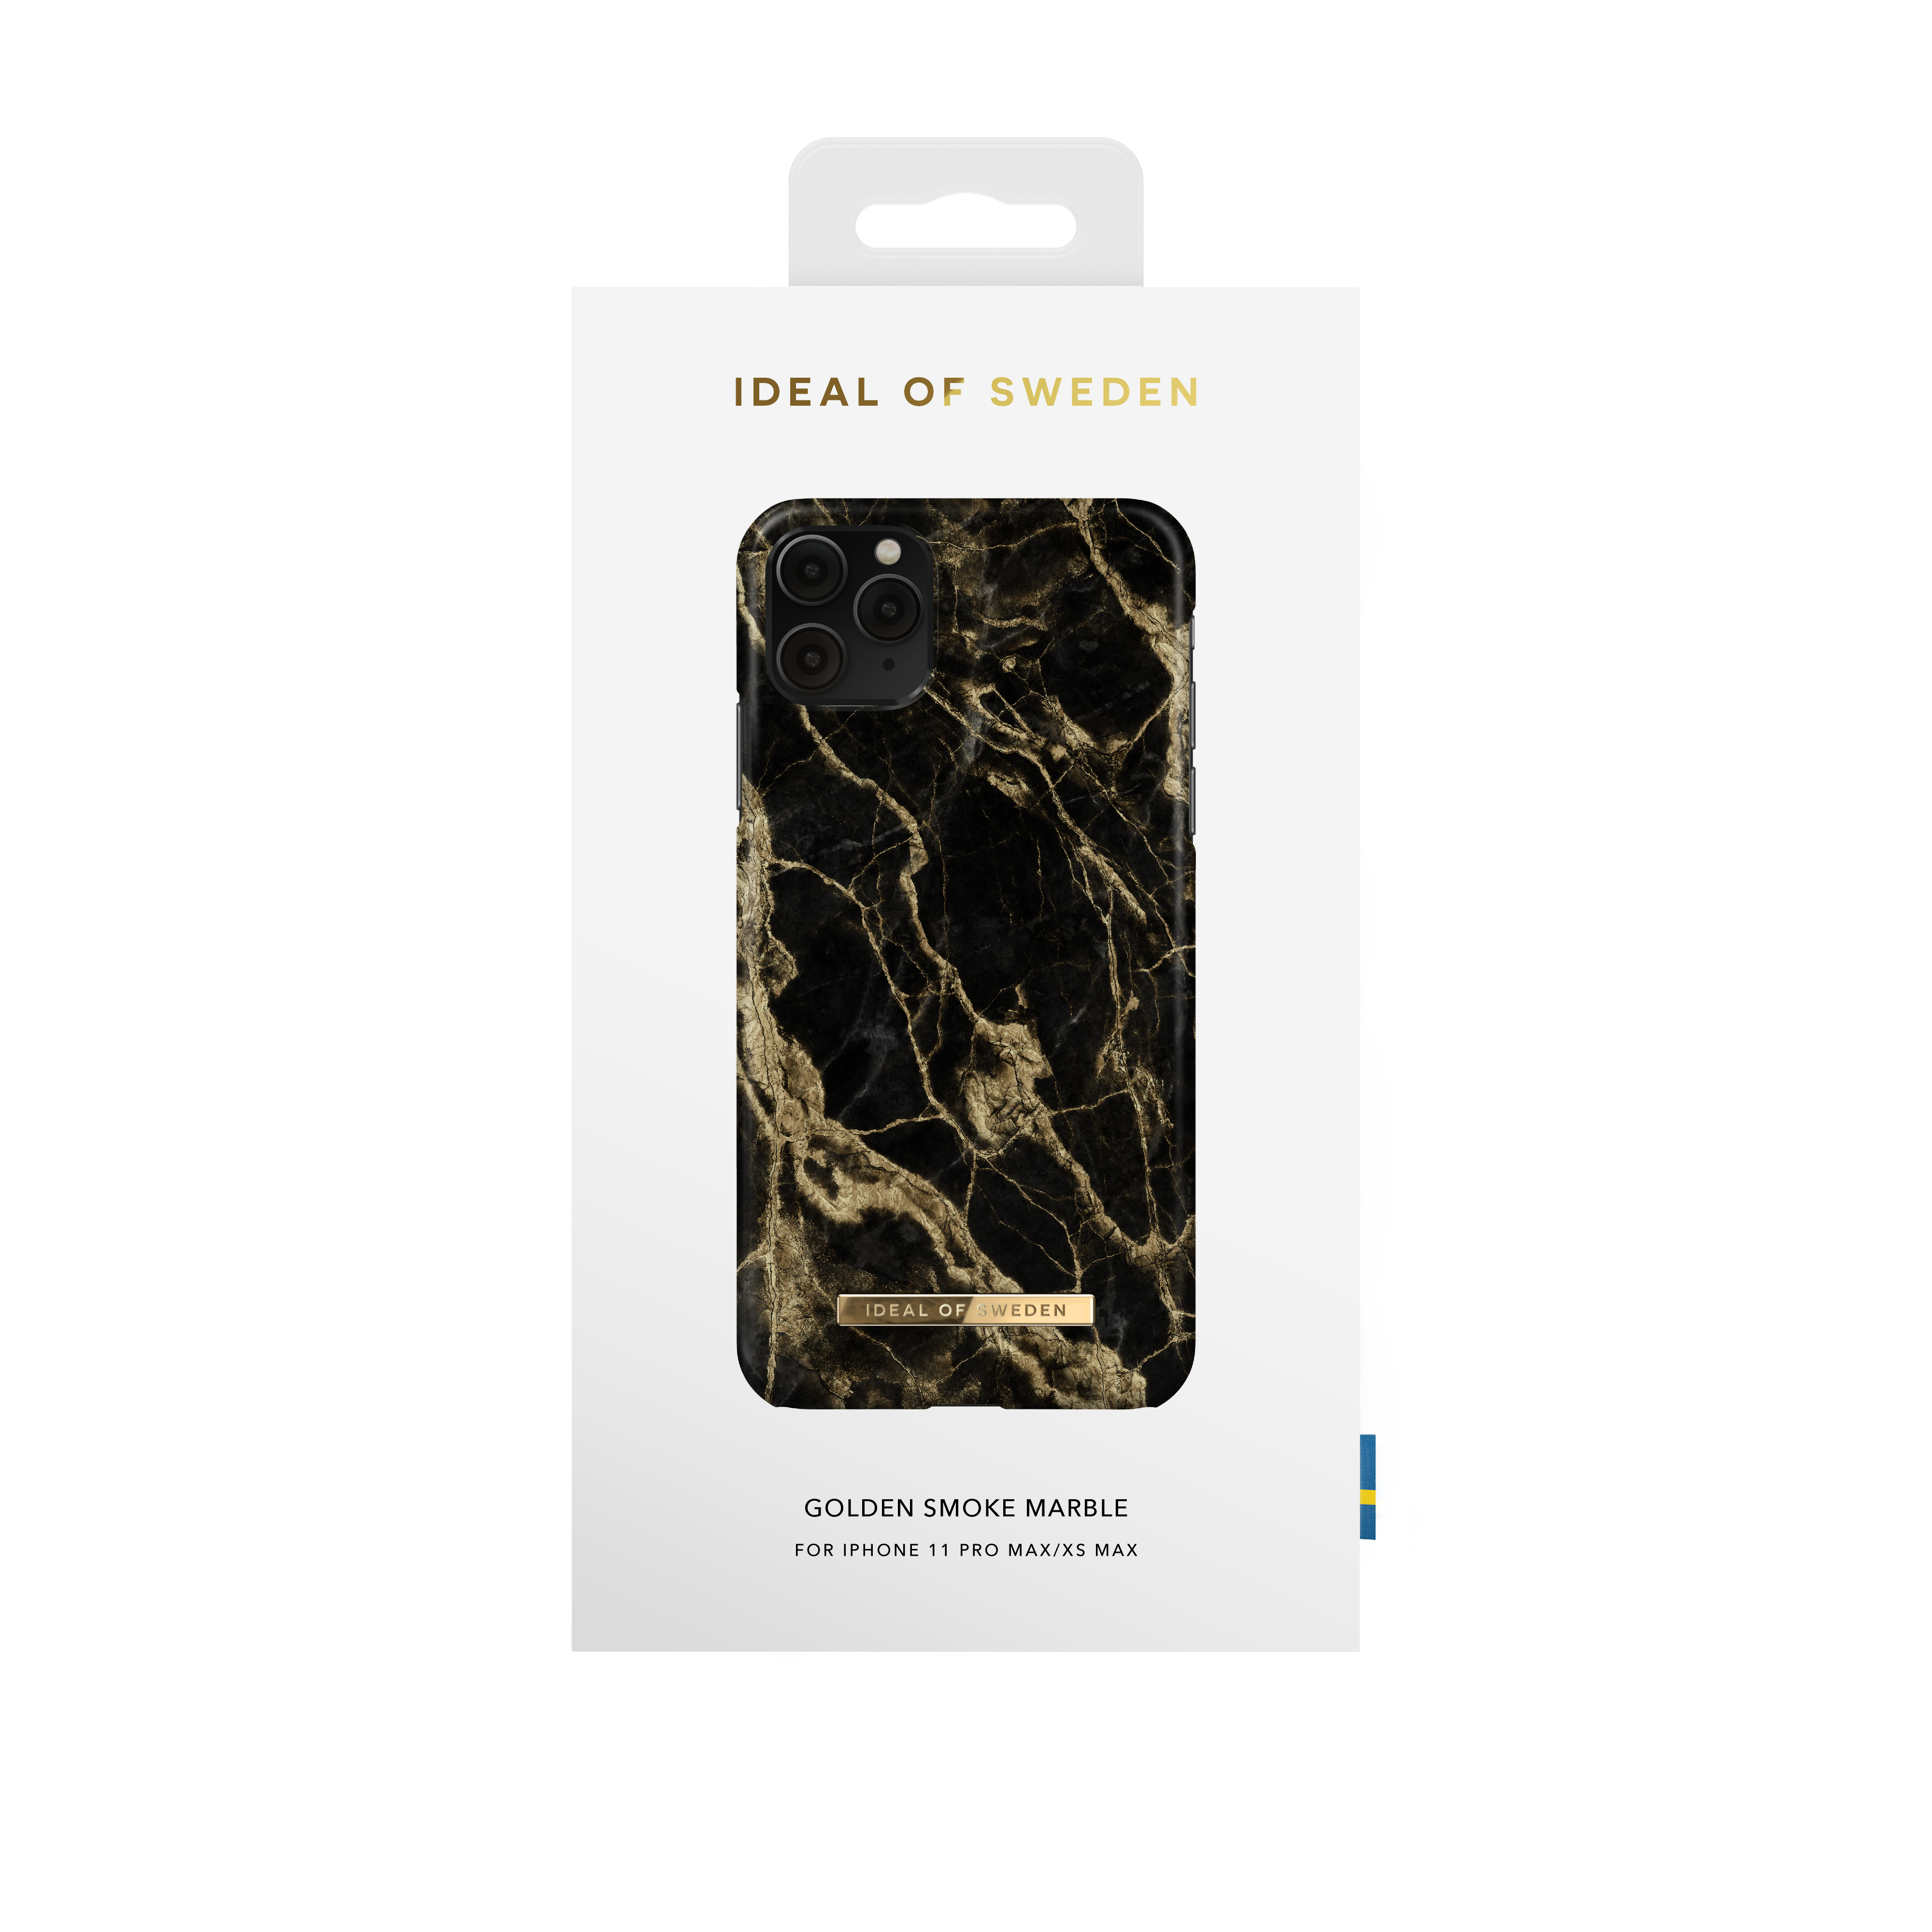 IDEAL OF SWEDEN IDFCSS20-I1965-191, XS Max, Marble Apple, Smoke iPhone Max, 11 iPhone Golden Backcover, Pro